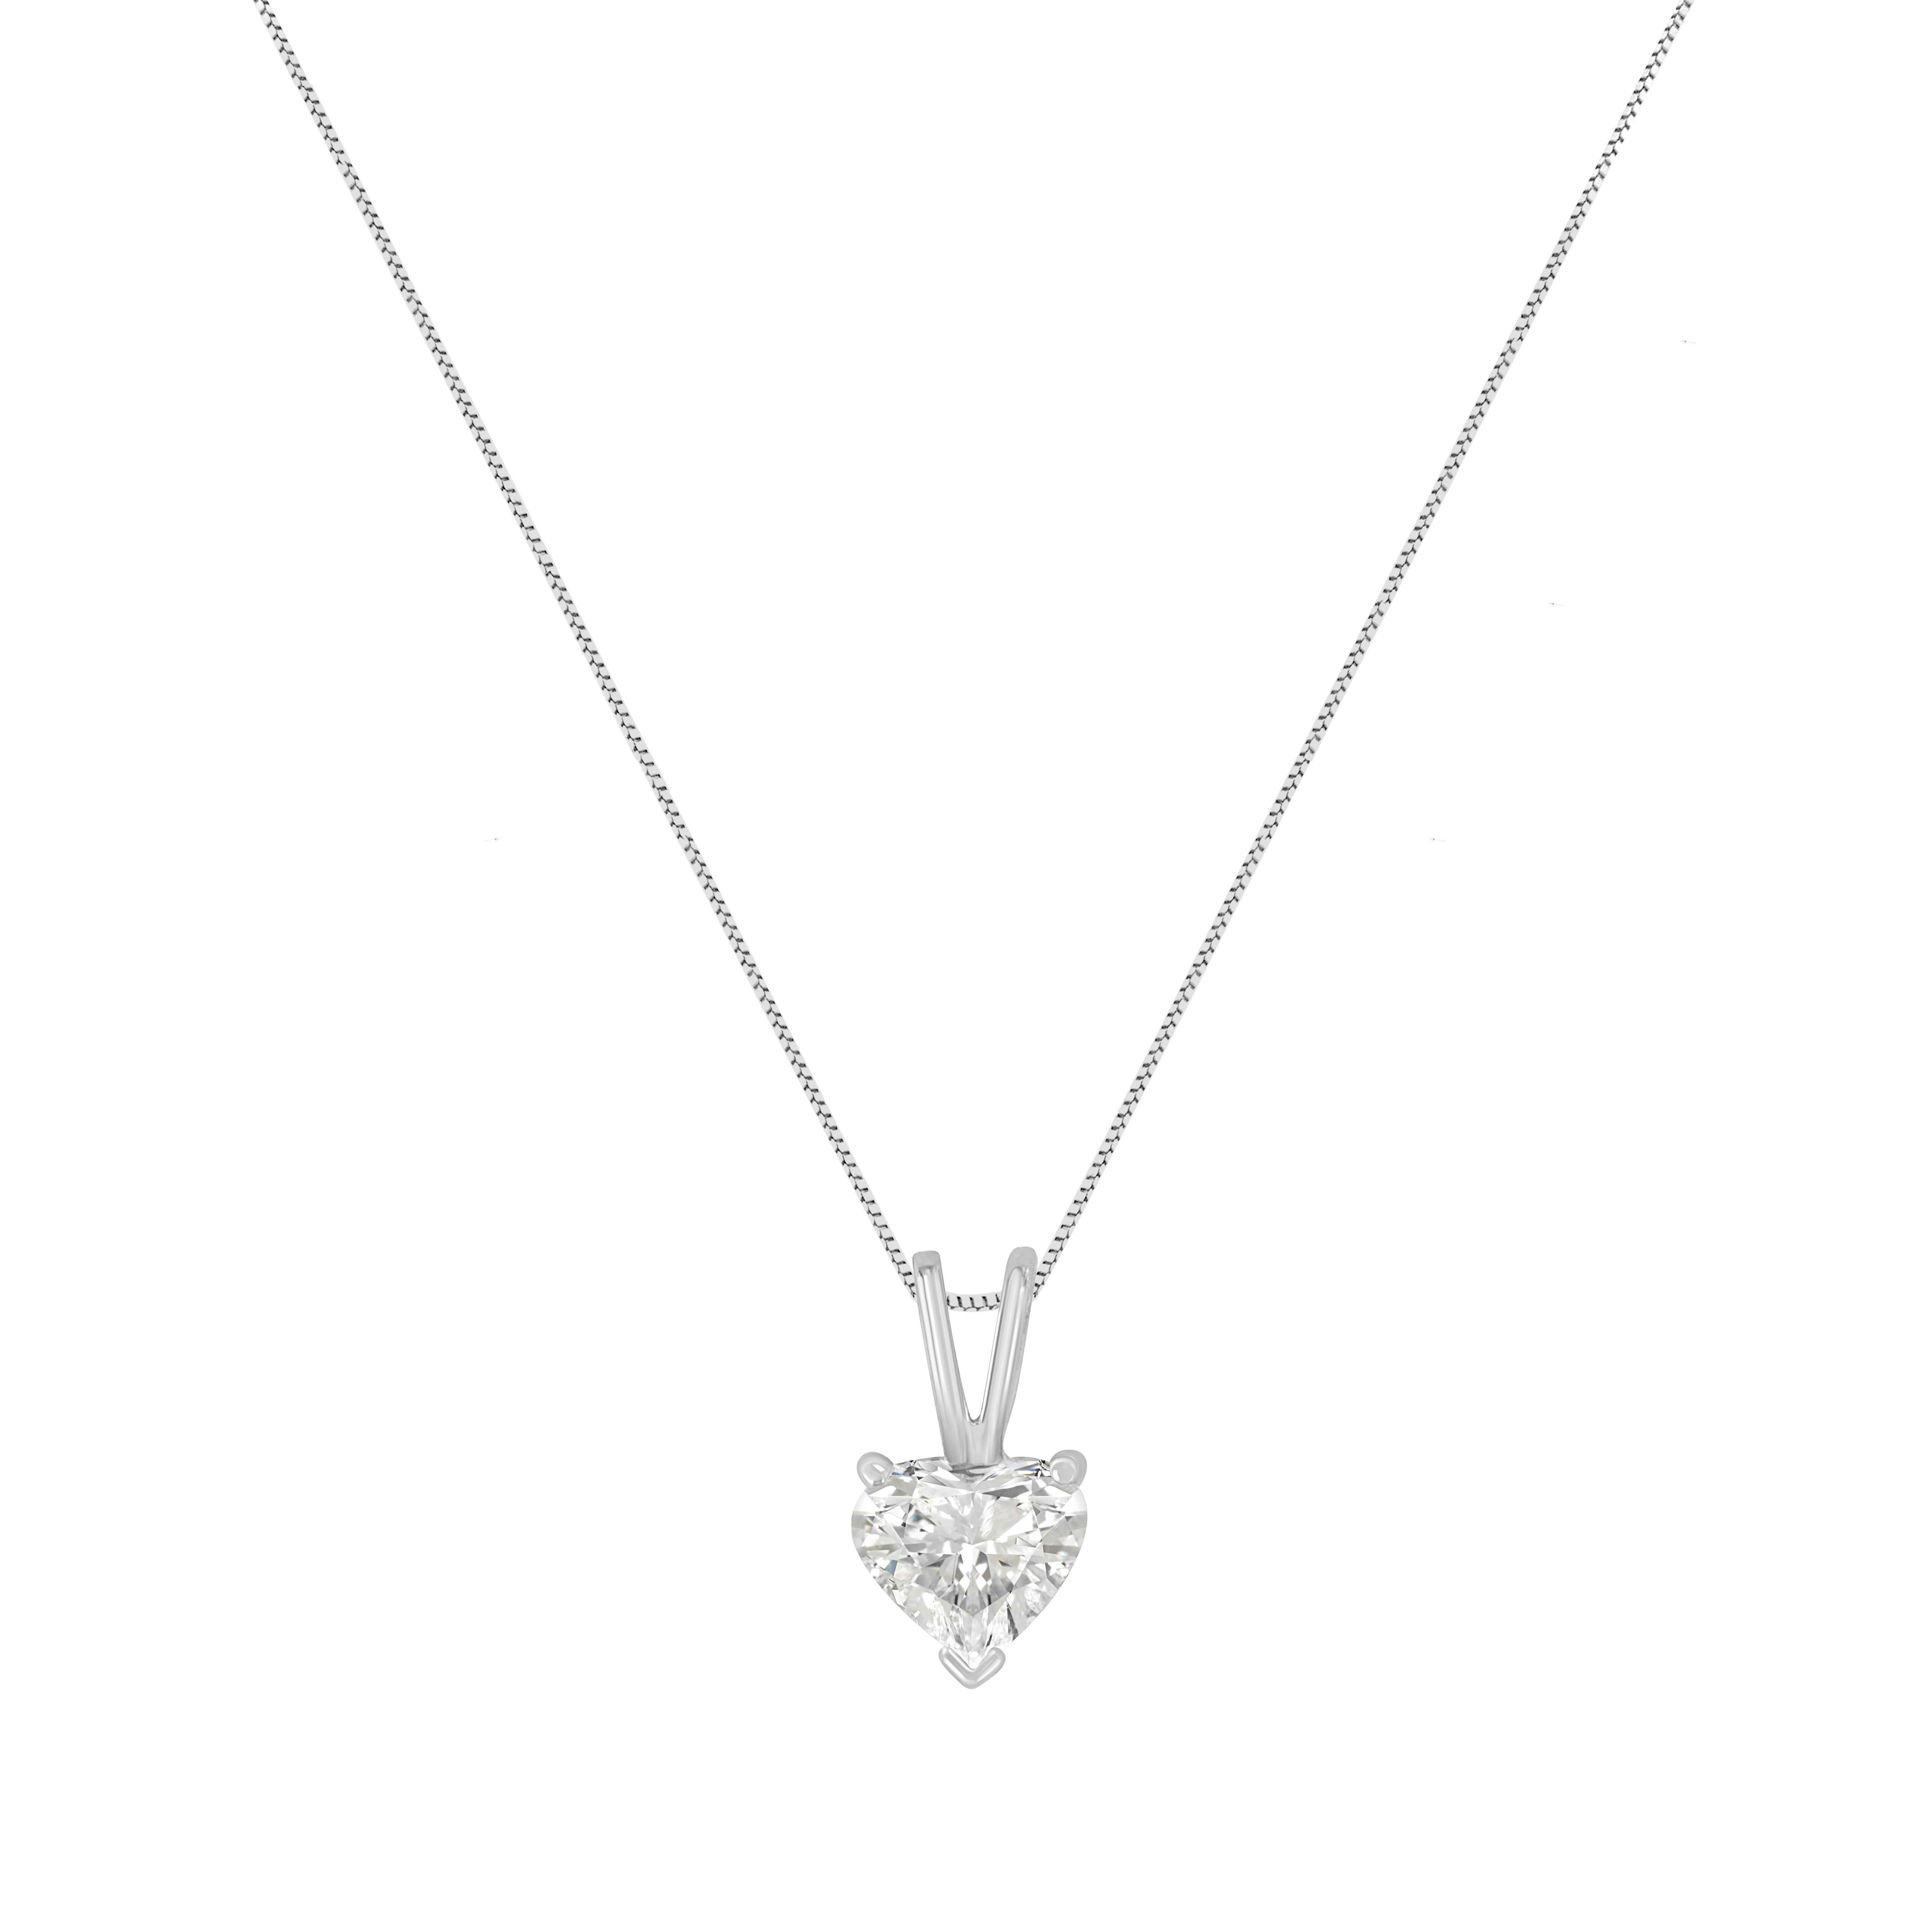 Modern AGS Certified 14k White Gold 1/2 Cttw Heart Shaped Solitaire Diamond Pendant